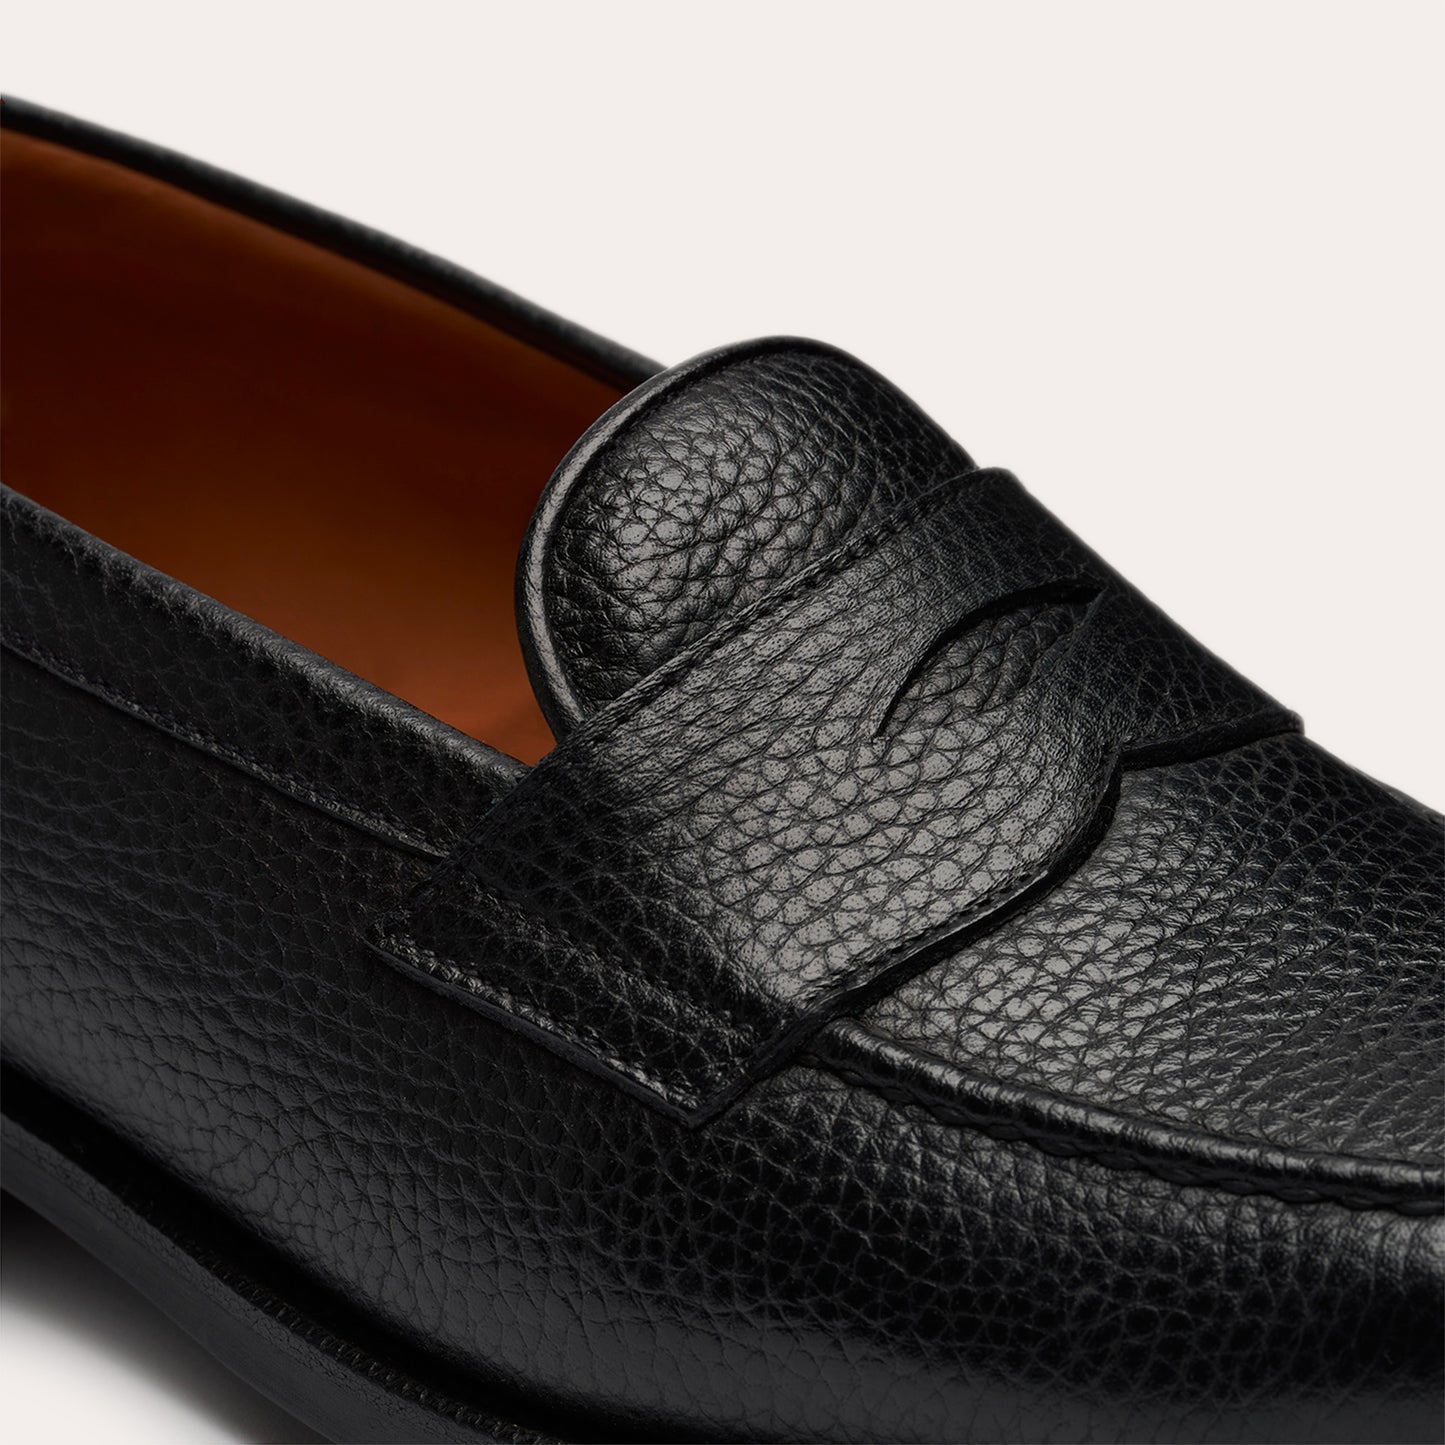 Black grained leather moccasin